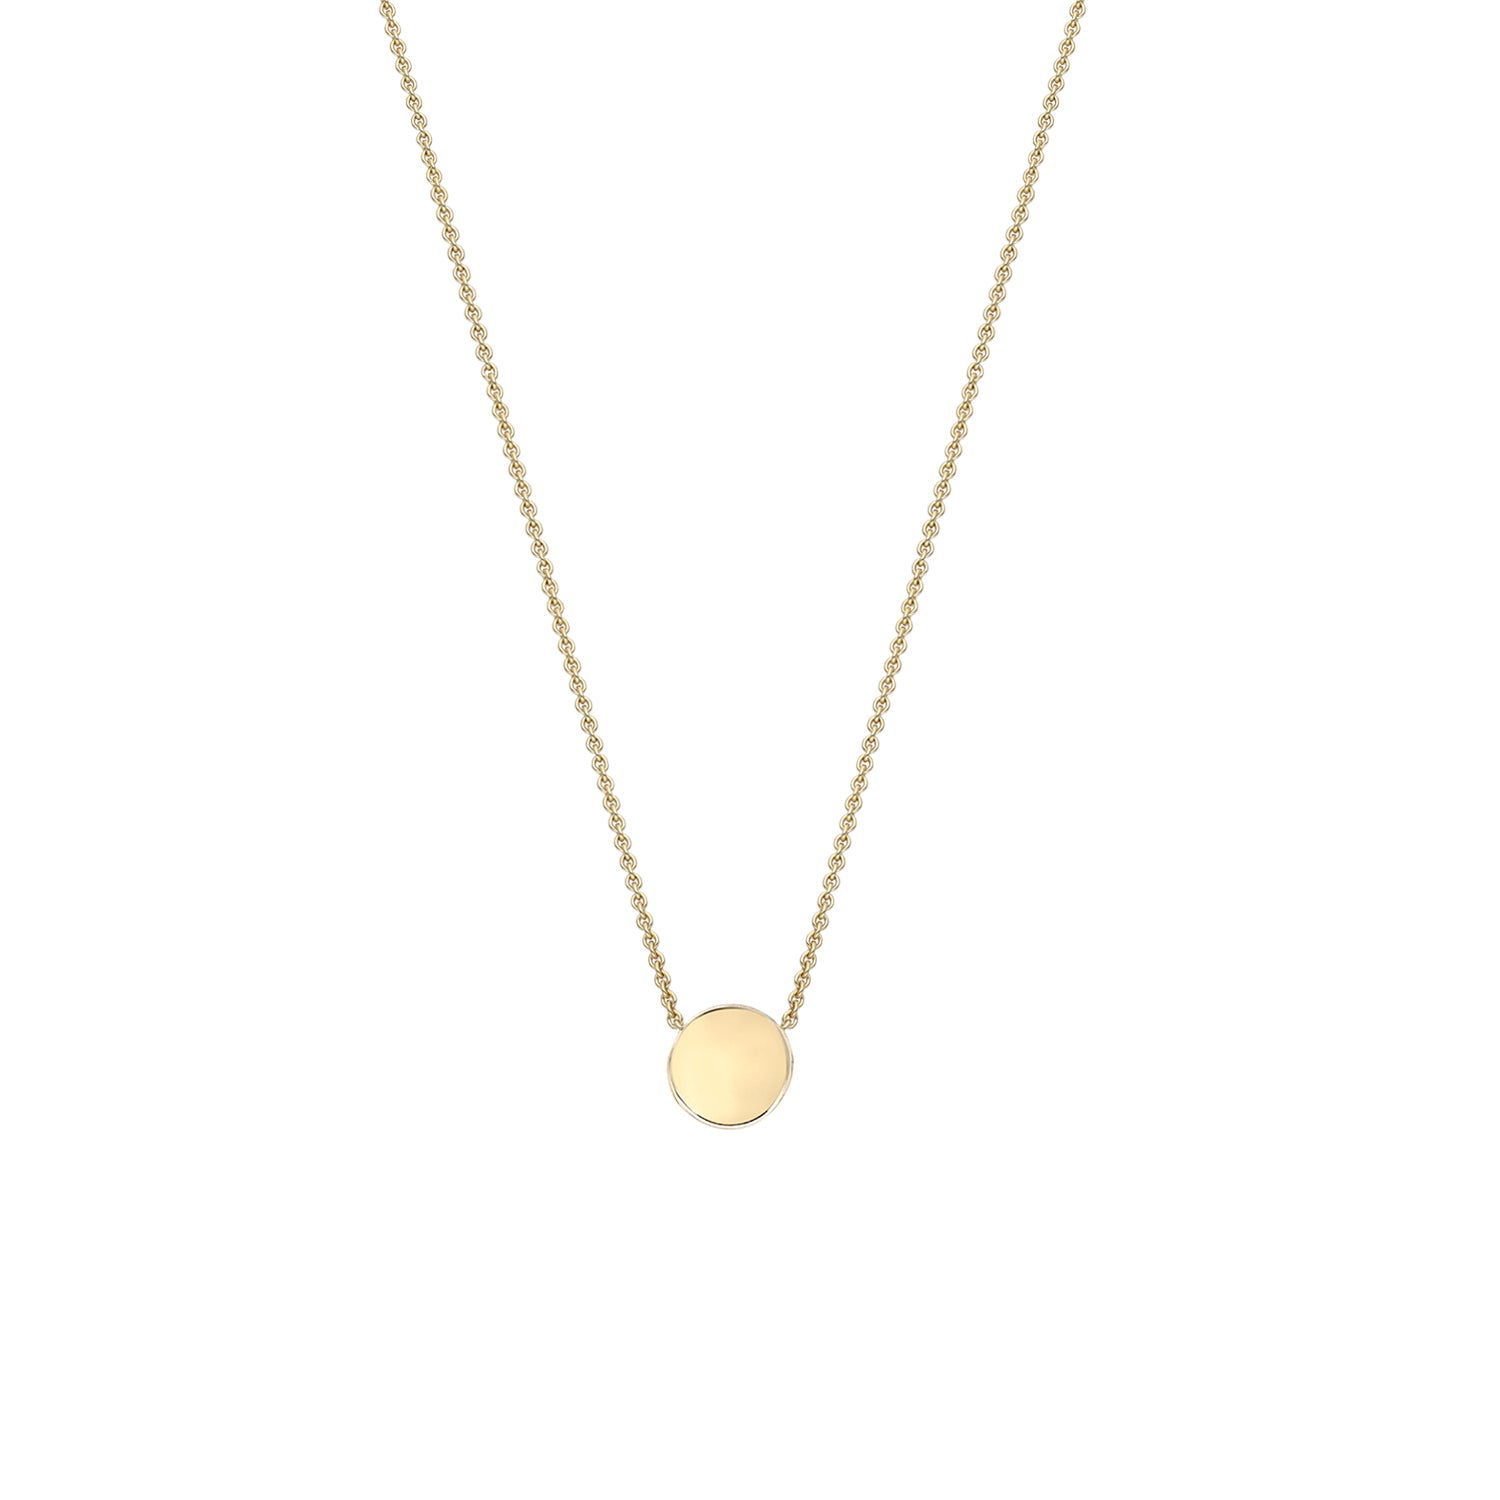 Small world solid gold necklace